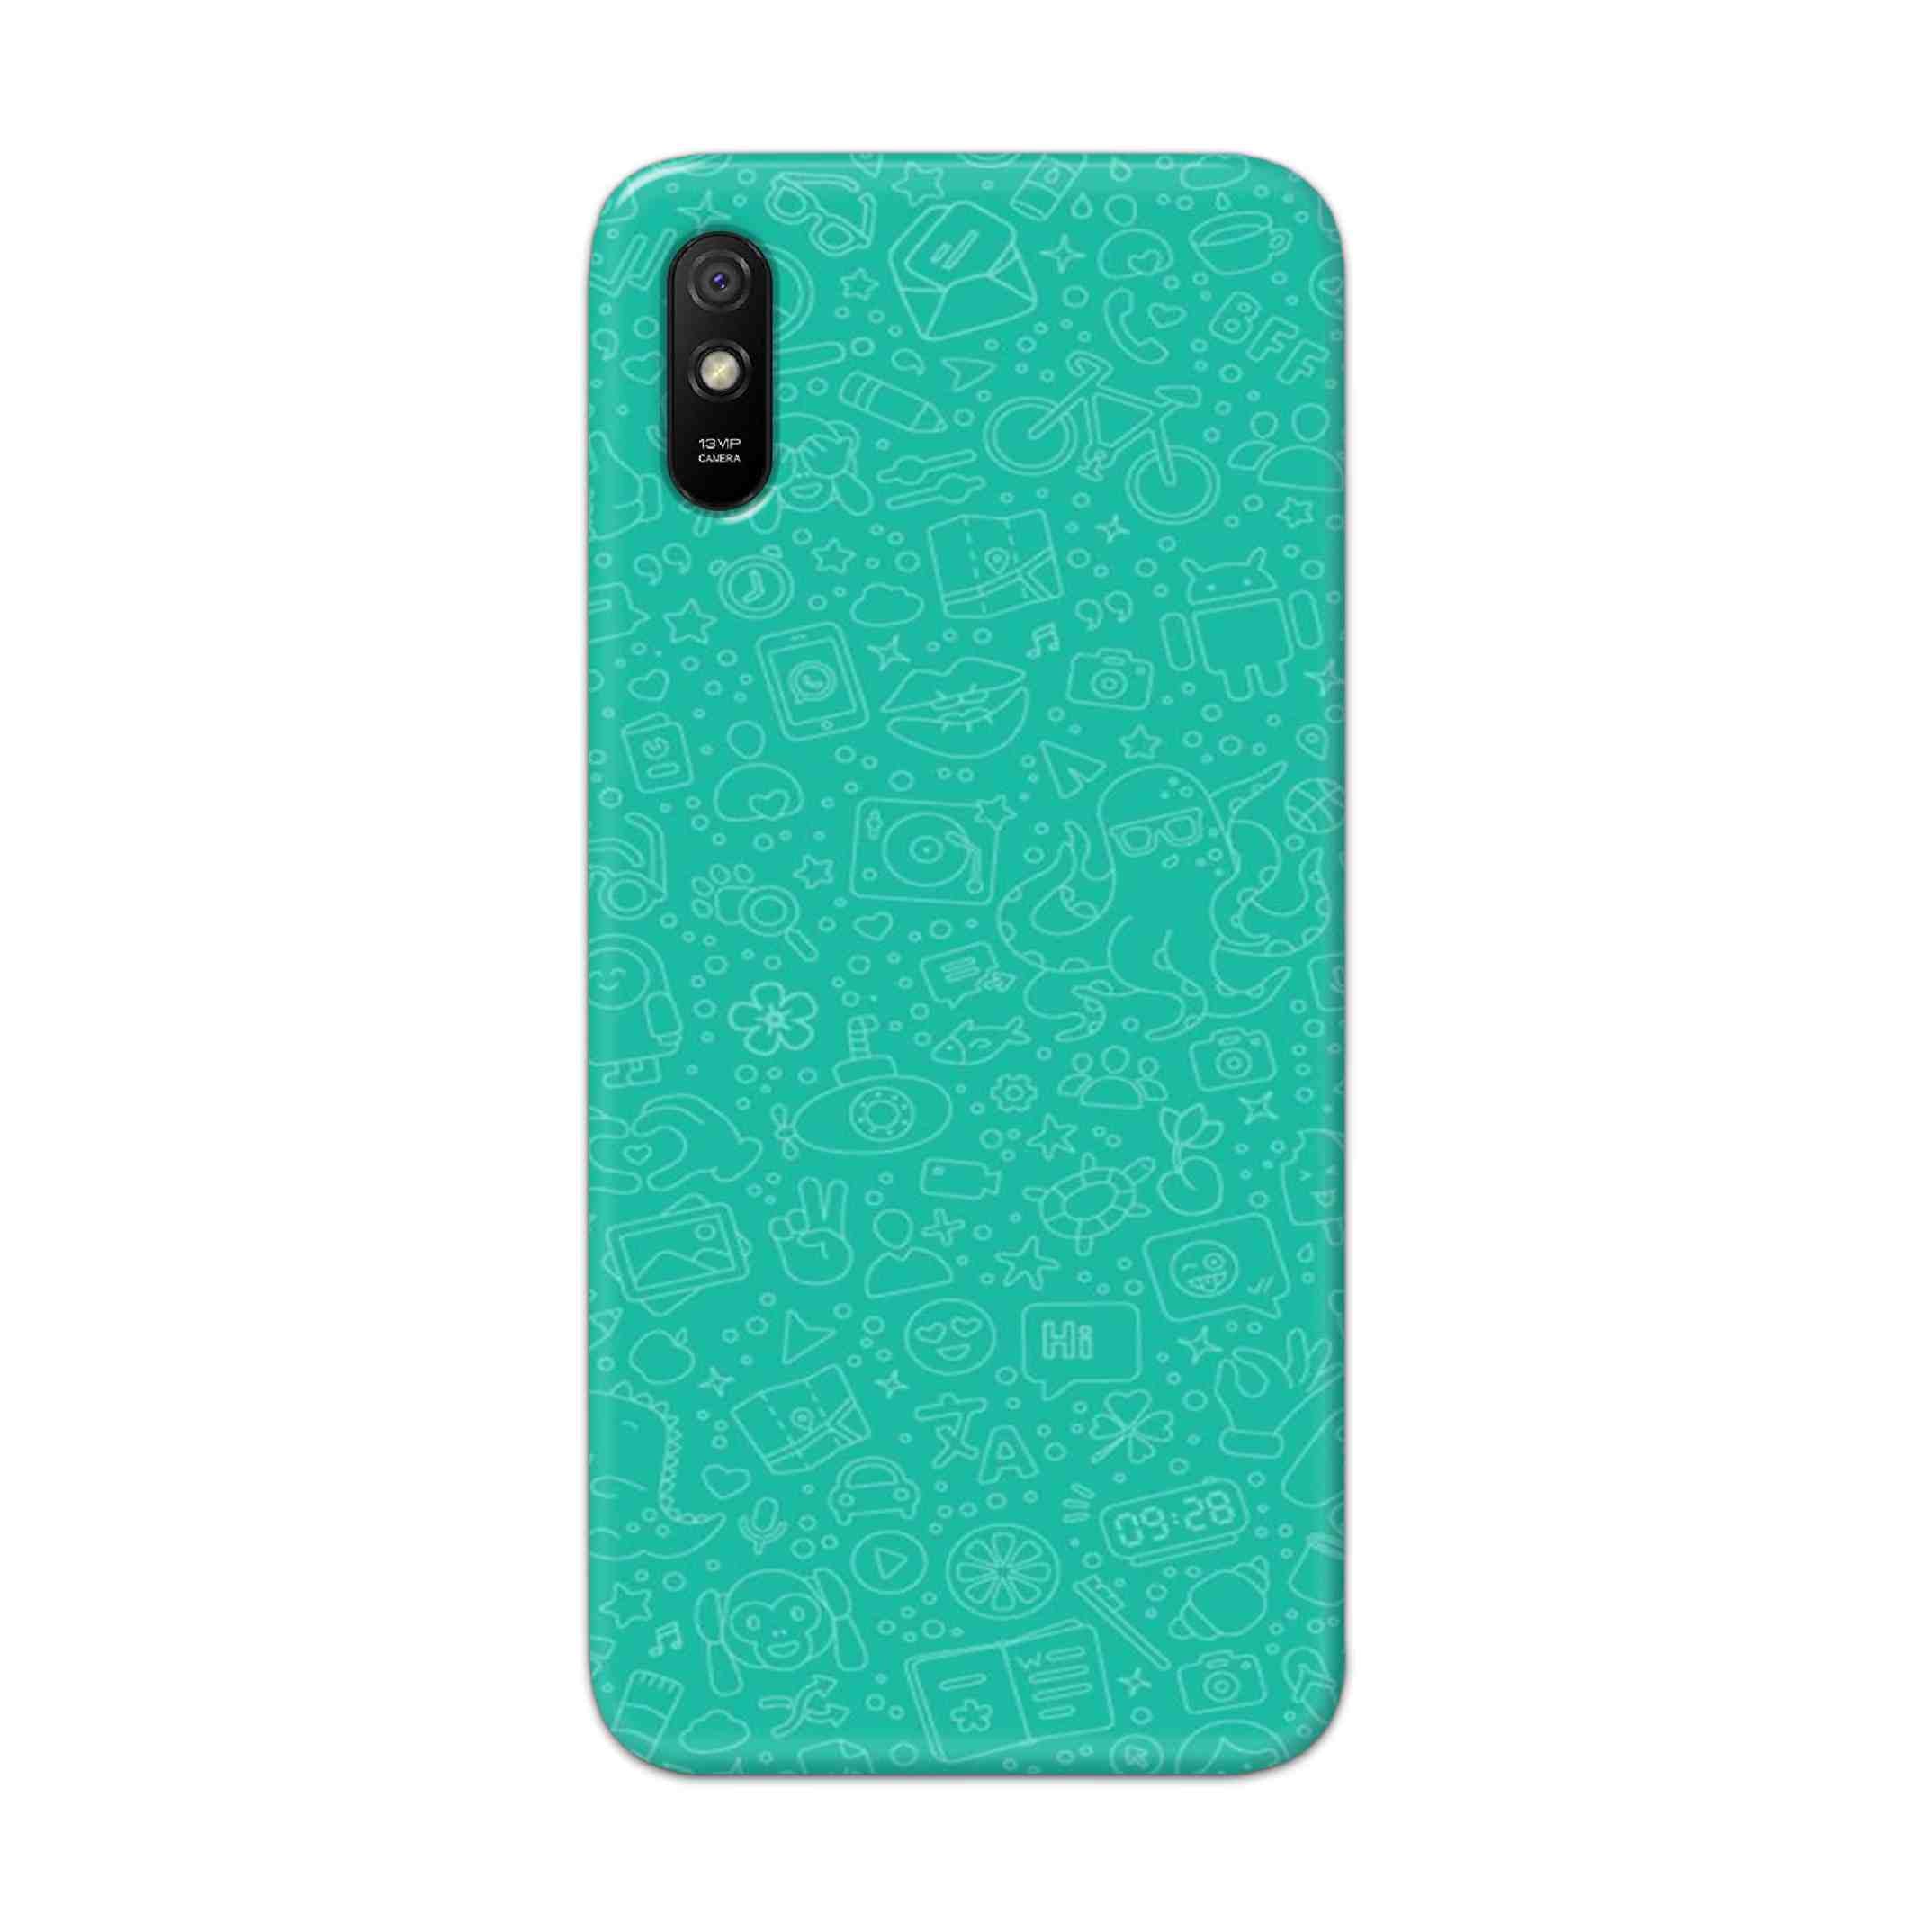 Buy Whatsapp Hard Back Mobile Phone Case Cover For Redmi 9A Online